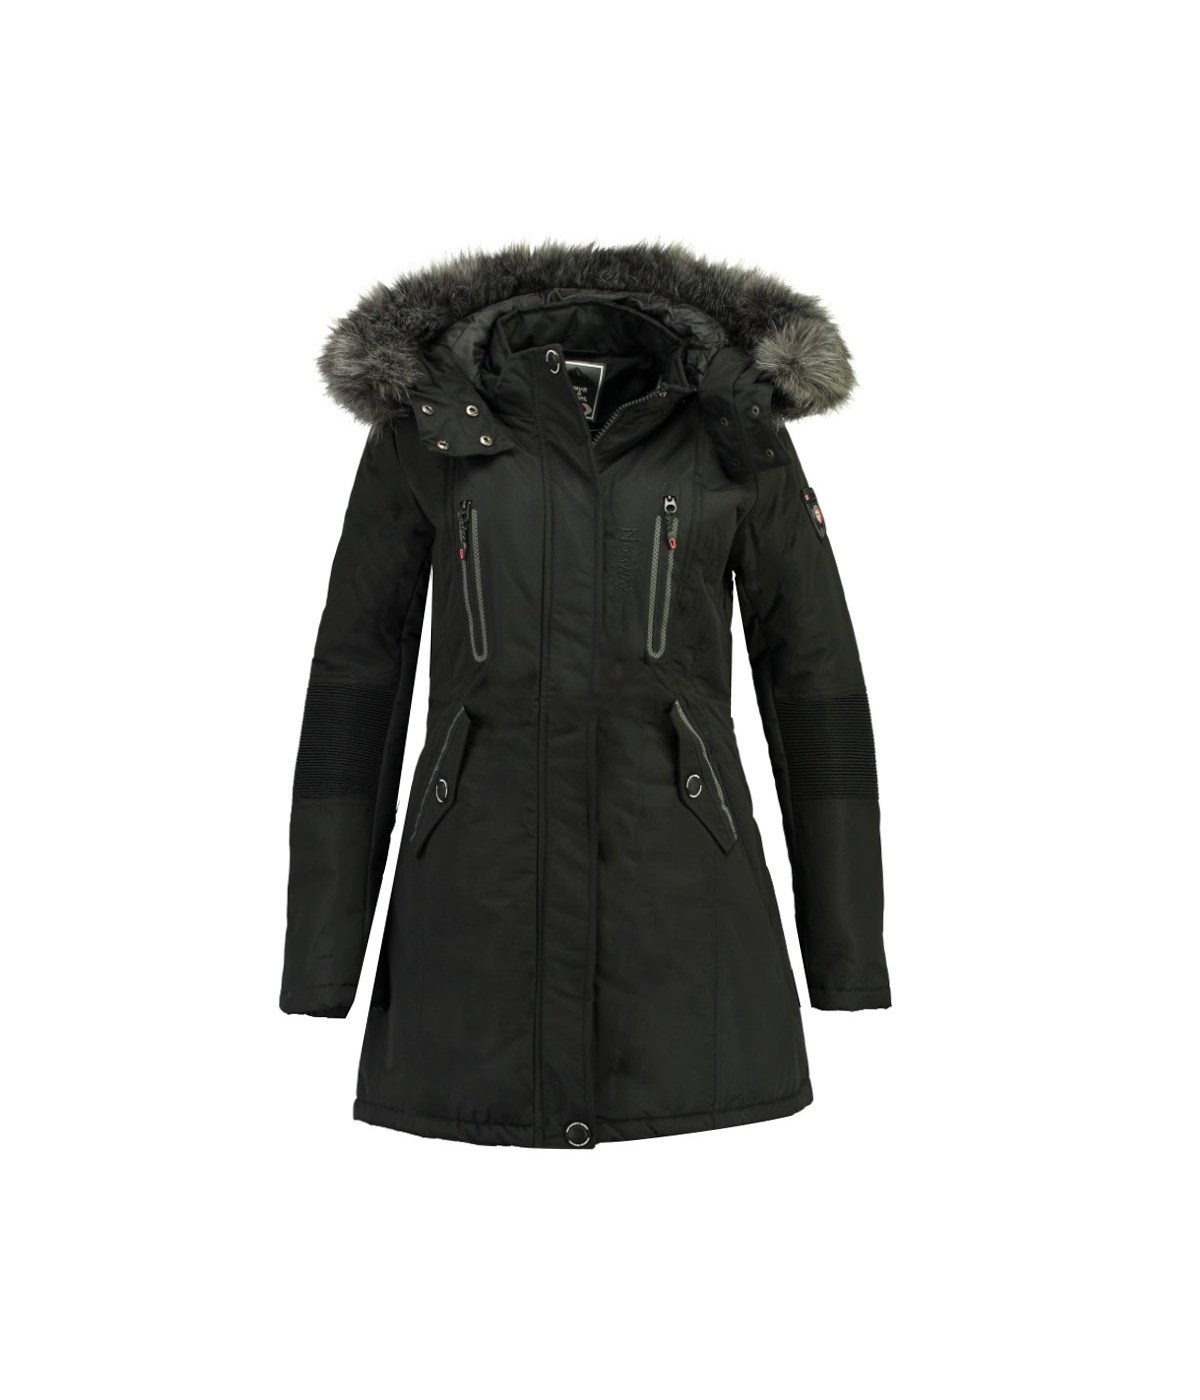 Parka Femme Geographical Norway Coraly Noir | SHOWROOMVIP : Parkas Femme